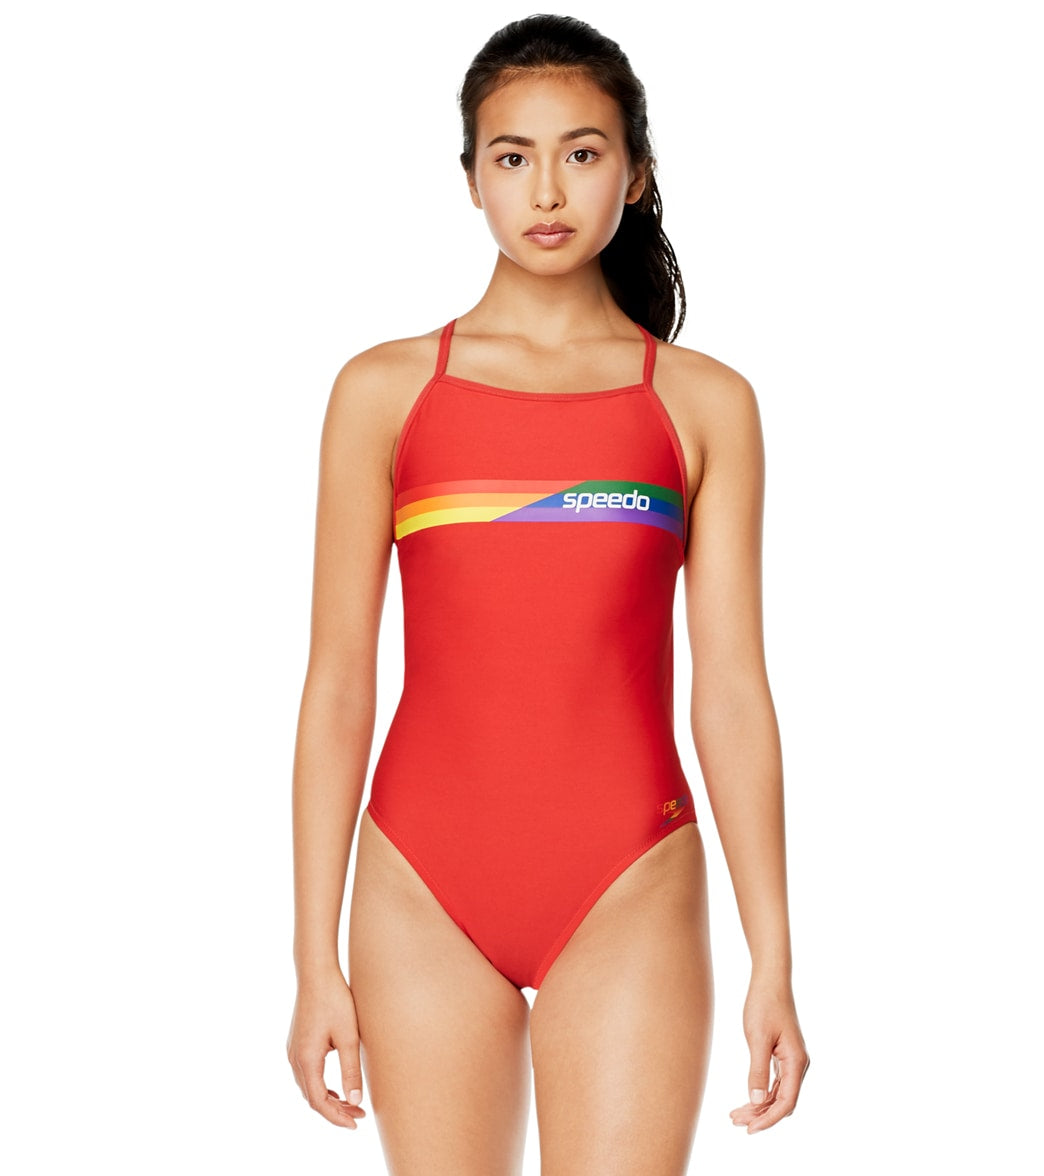 Speedo Pride Women's Graphic One Back One Piece Swimsuit at SwimOutlet.com